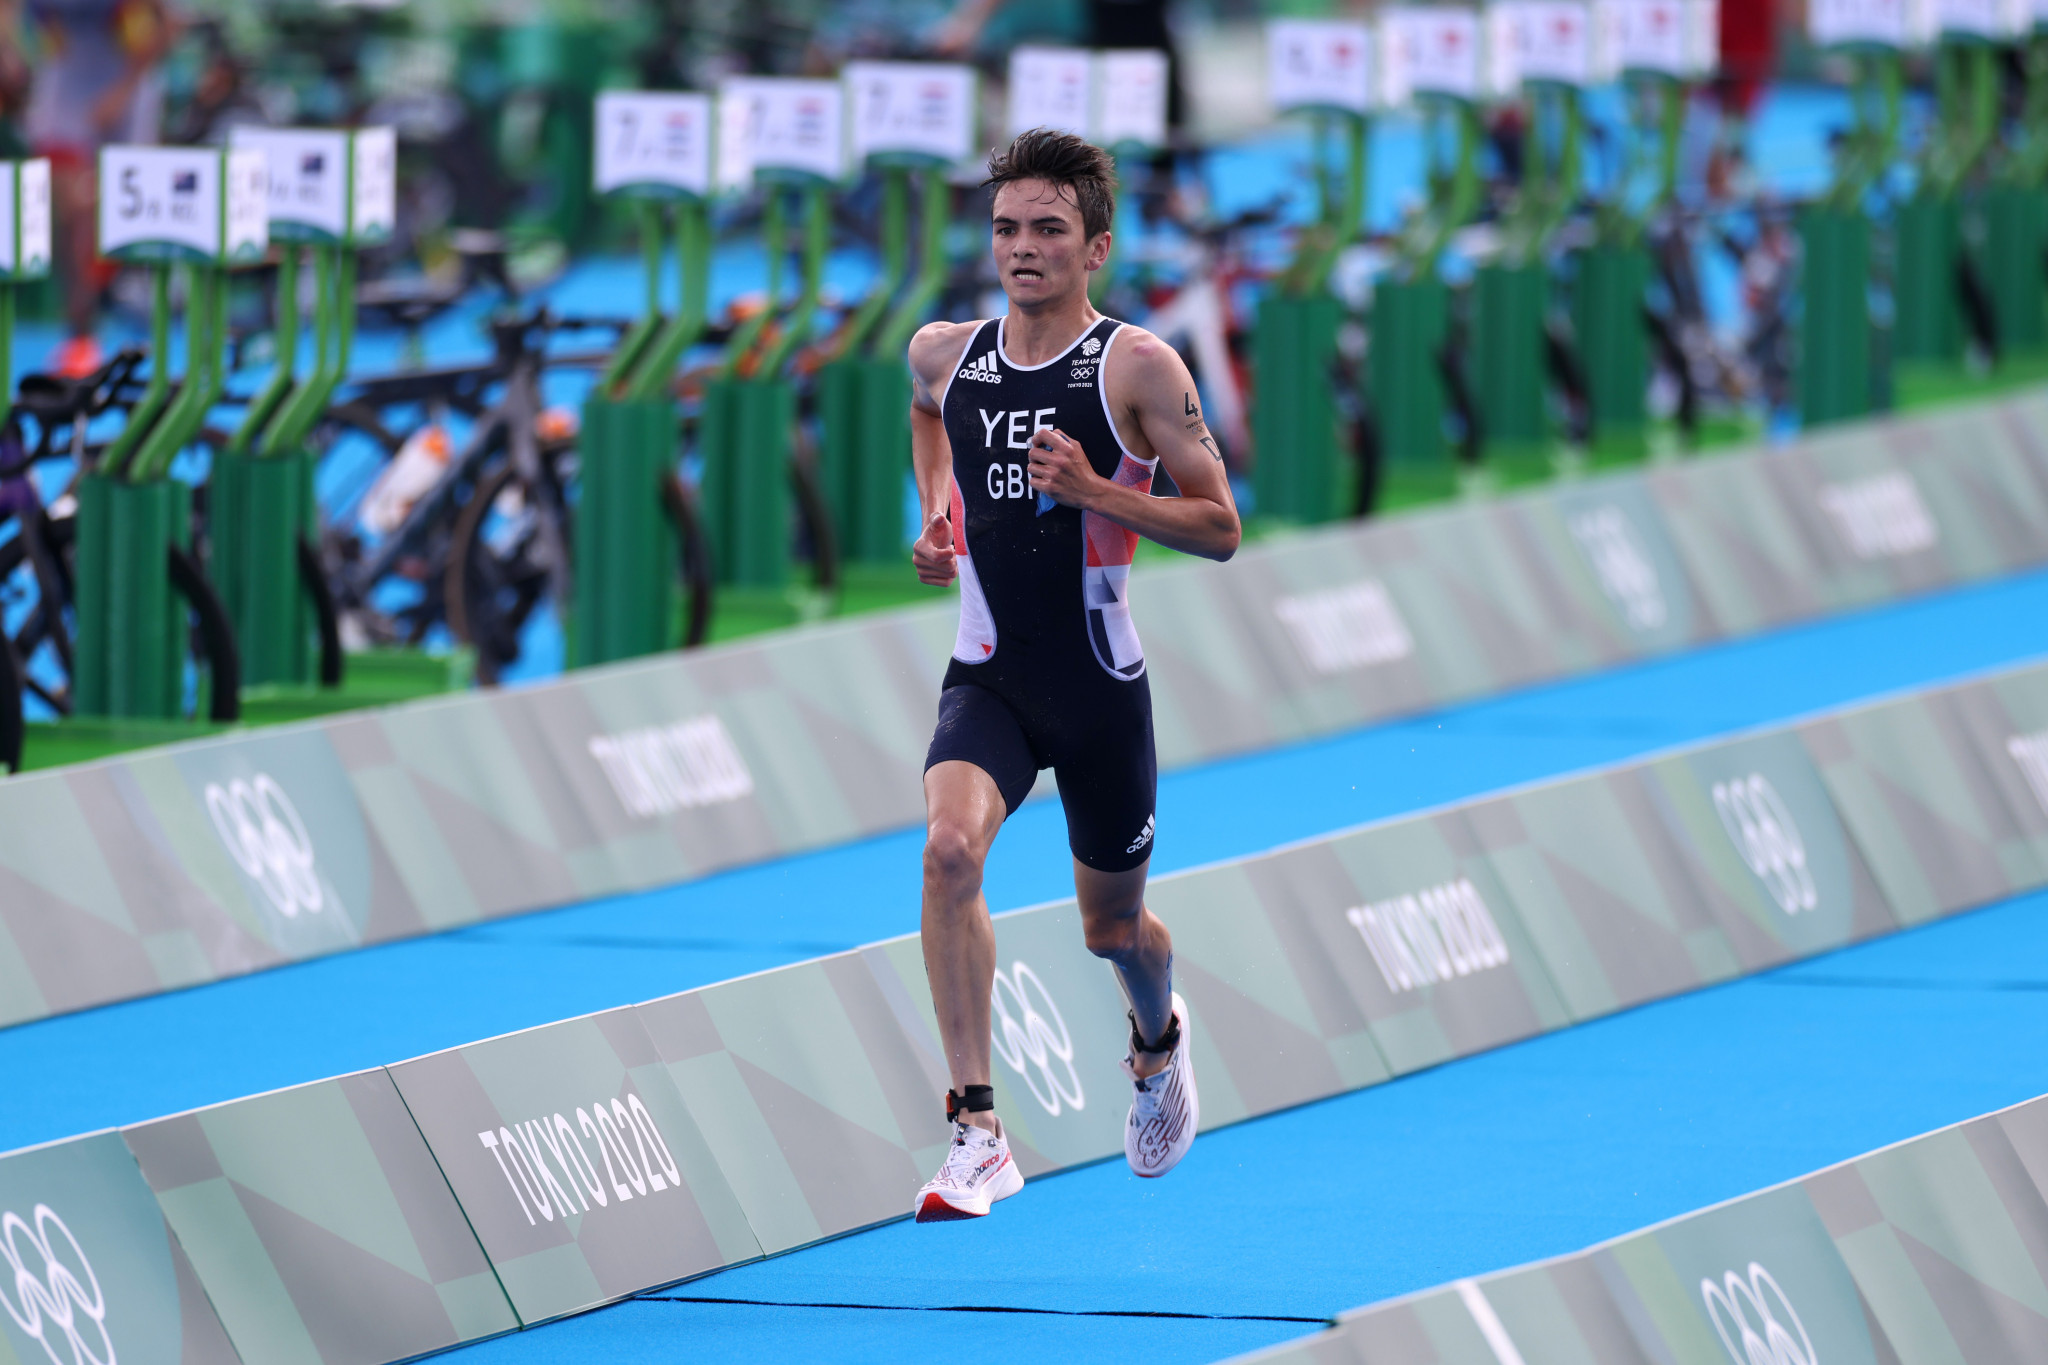 Britain's Alex Yee won his second race of the World Triathlon Championship Series season when he triumphed in Cagliari ©Getty Images